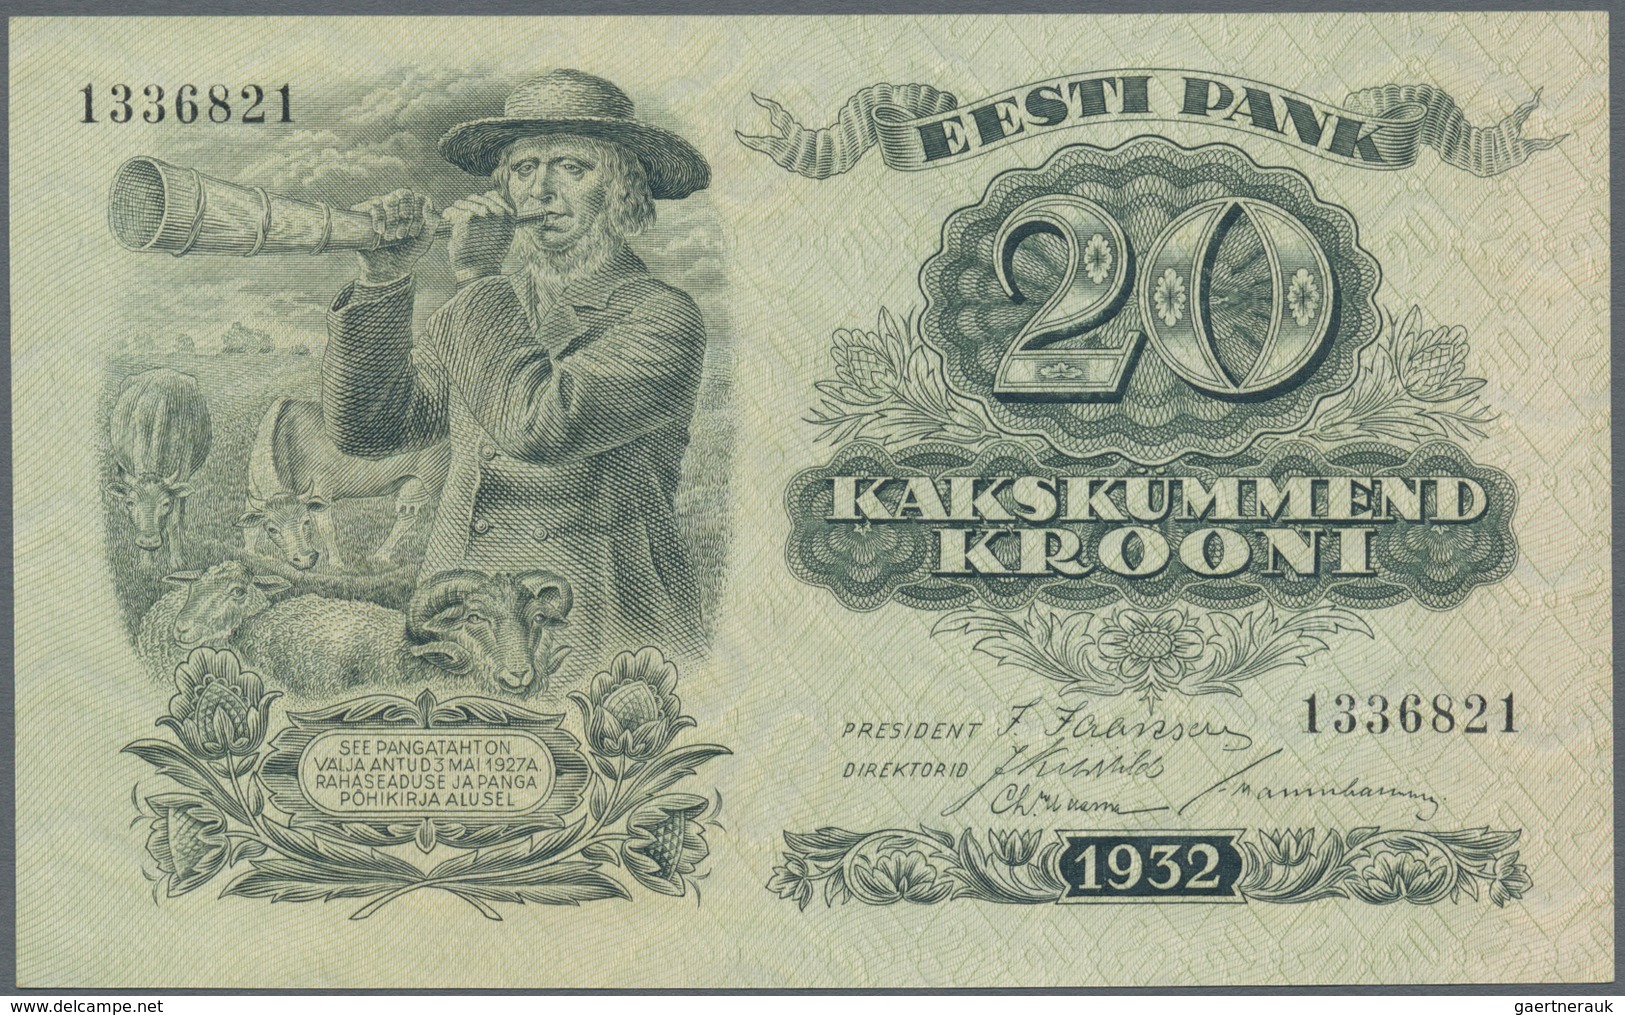 Estonia / Estland: Very nice set with 6 Banknotes series 1928-37 with 10 Krooni 1928 in about F, 5 a